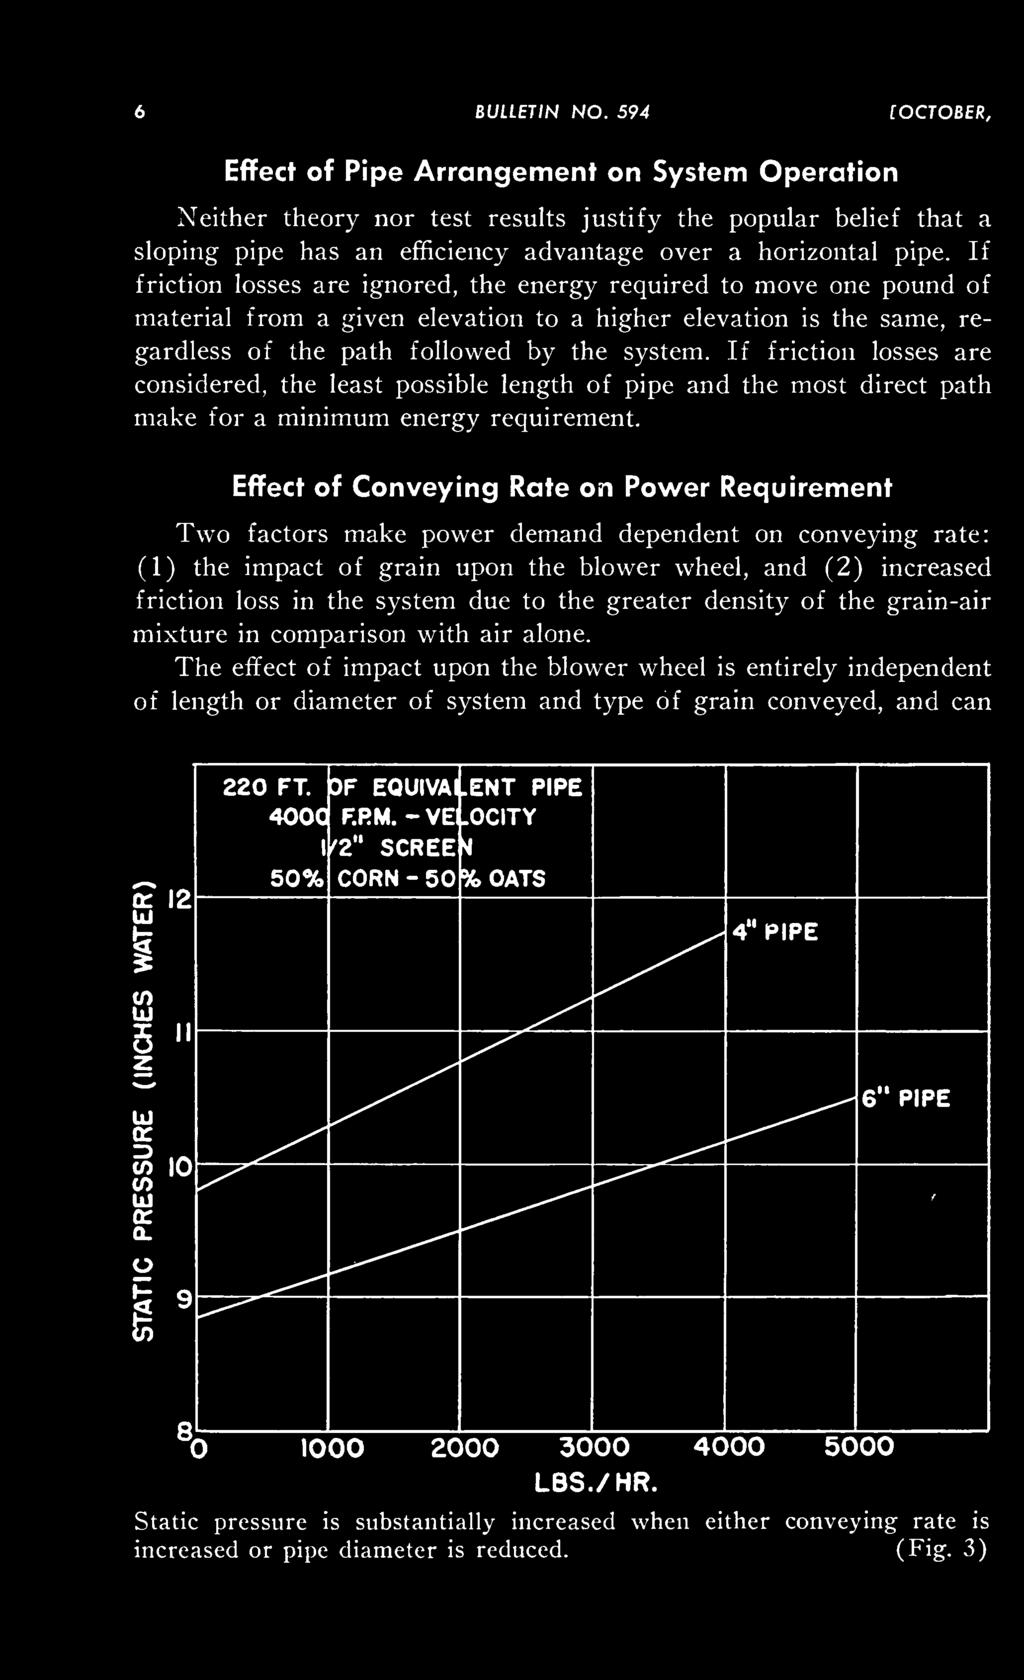 path followed by the system. If friction losses are considered, the least possible length of pipe and the most direct path make for a minimum energy requirement.